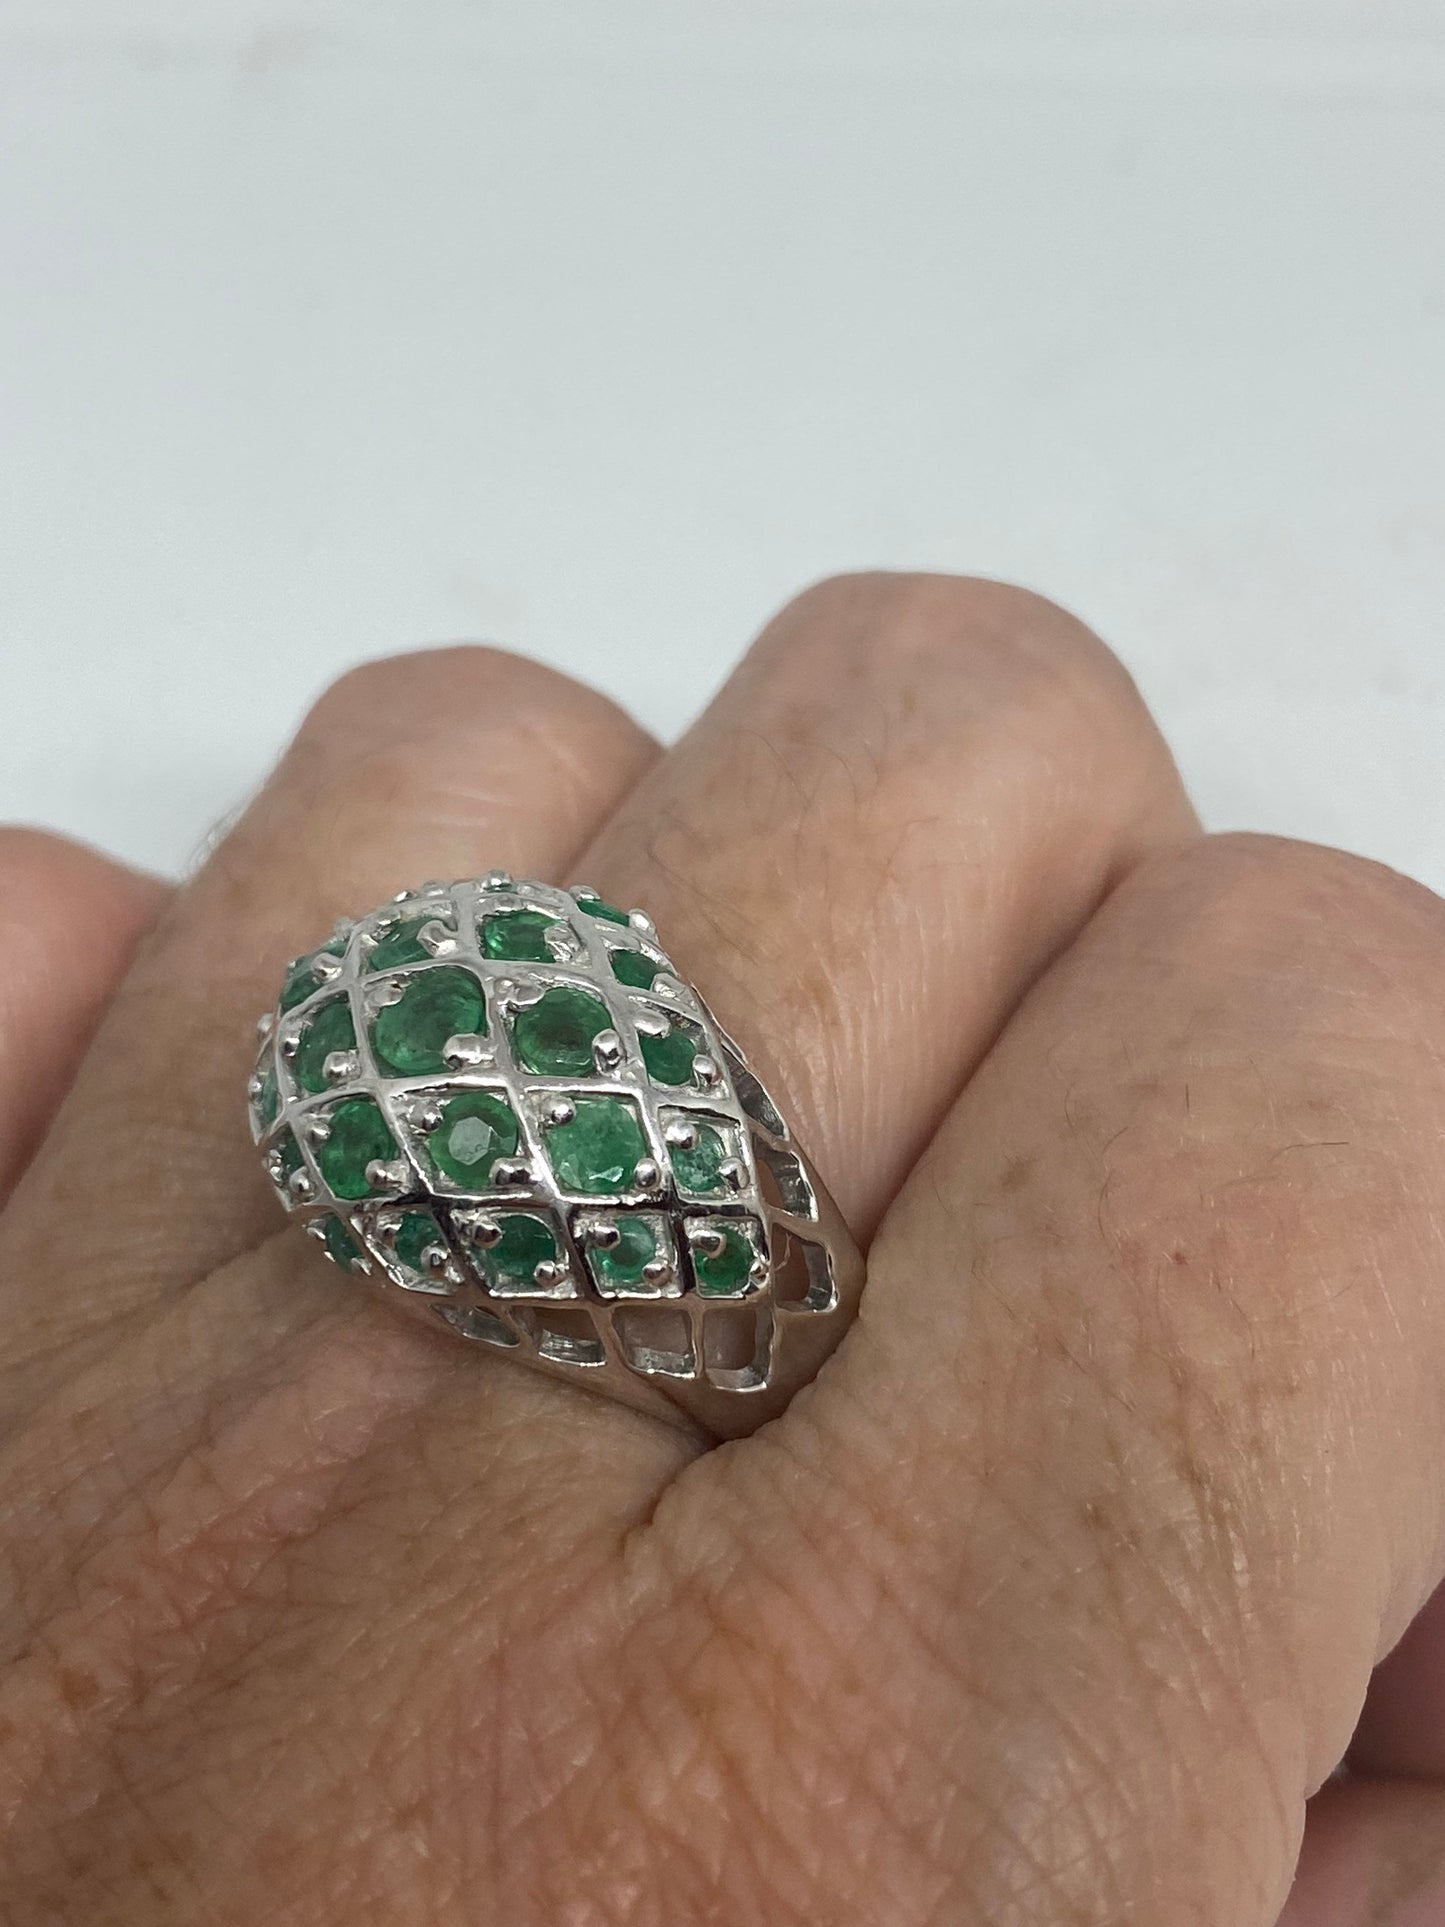 Vintage Green Emerald 925 Sterling Silver Ring Size 10.5